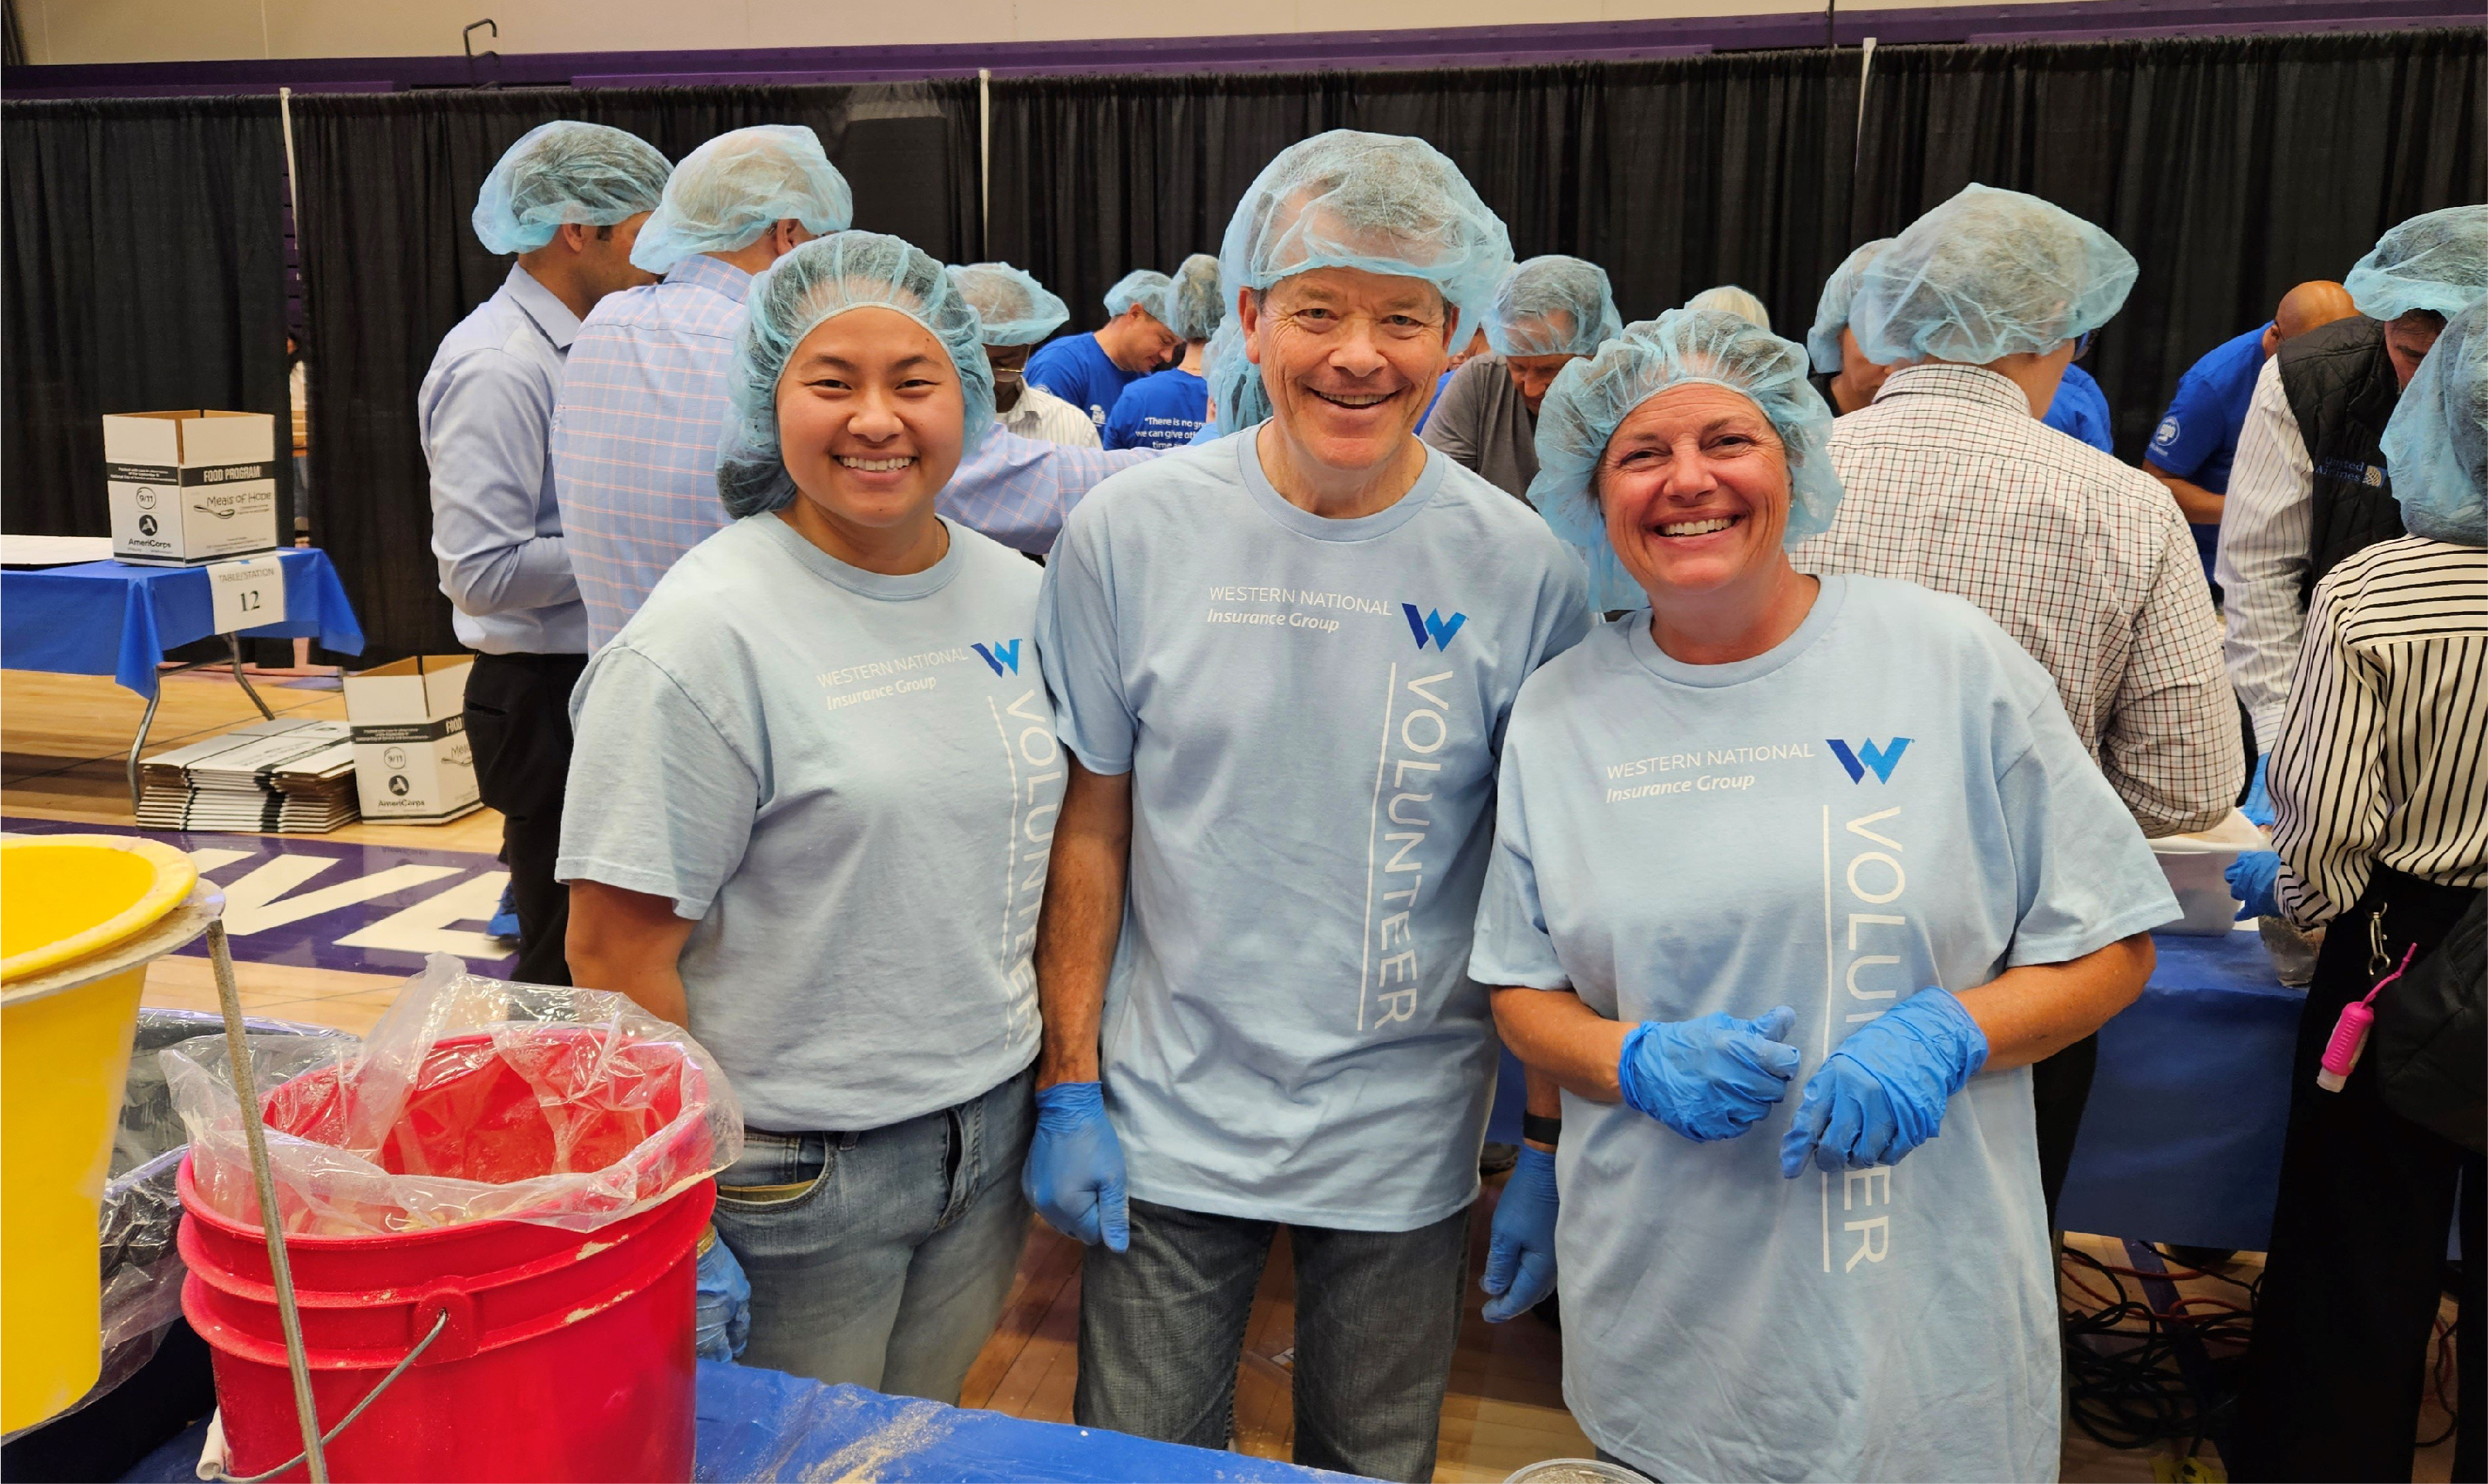 Western National employees smiling for the camera in their volunteer t-shirts and hair nets packing meals.